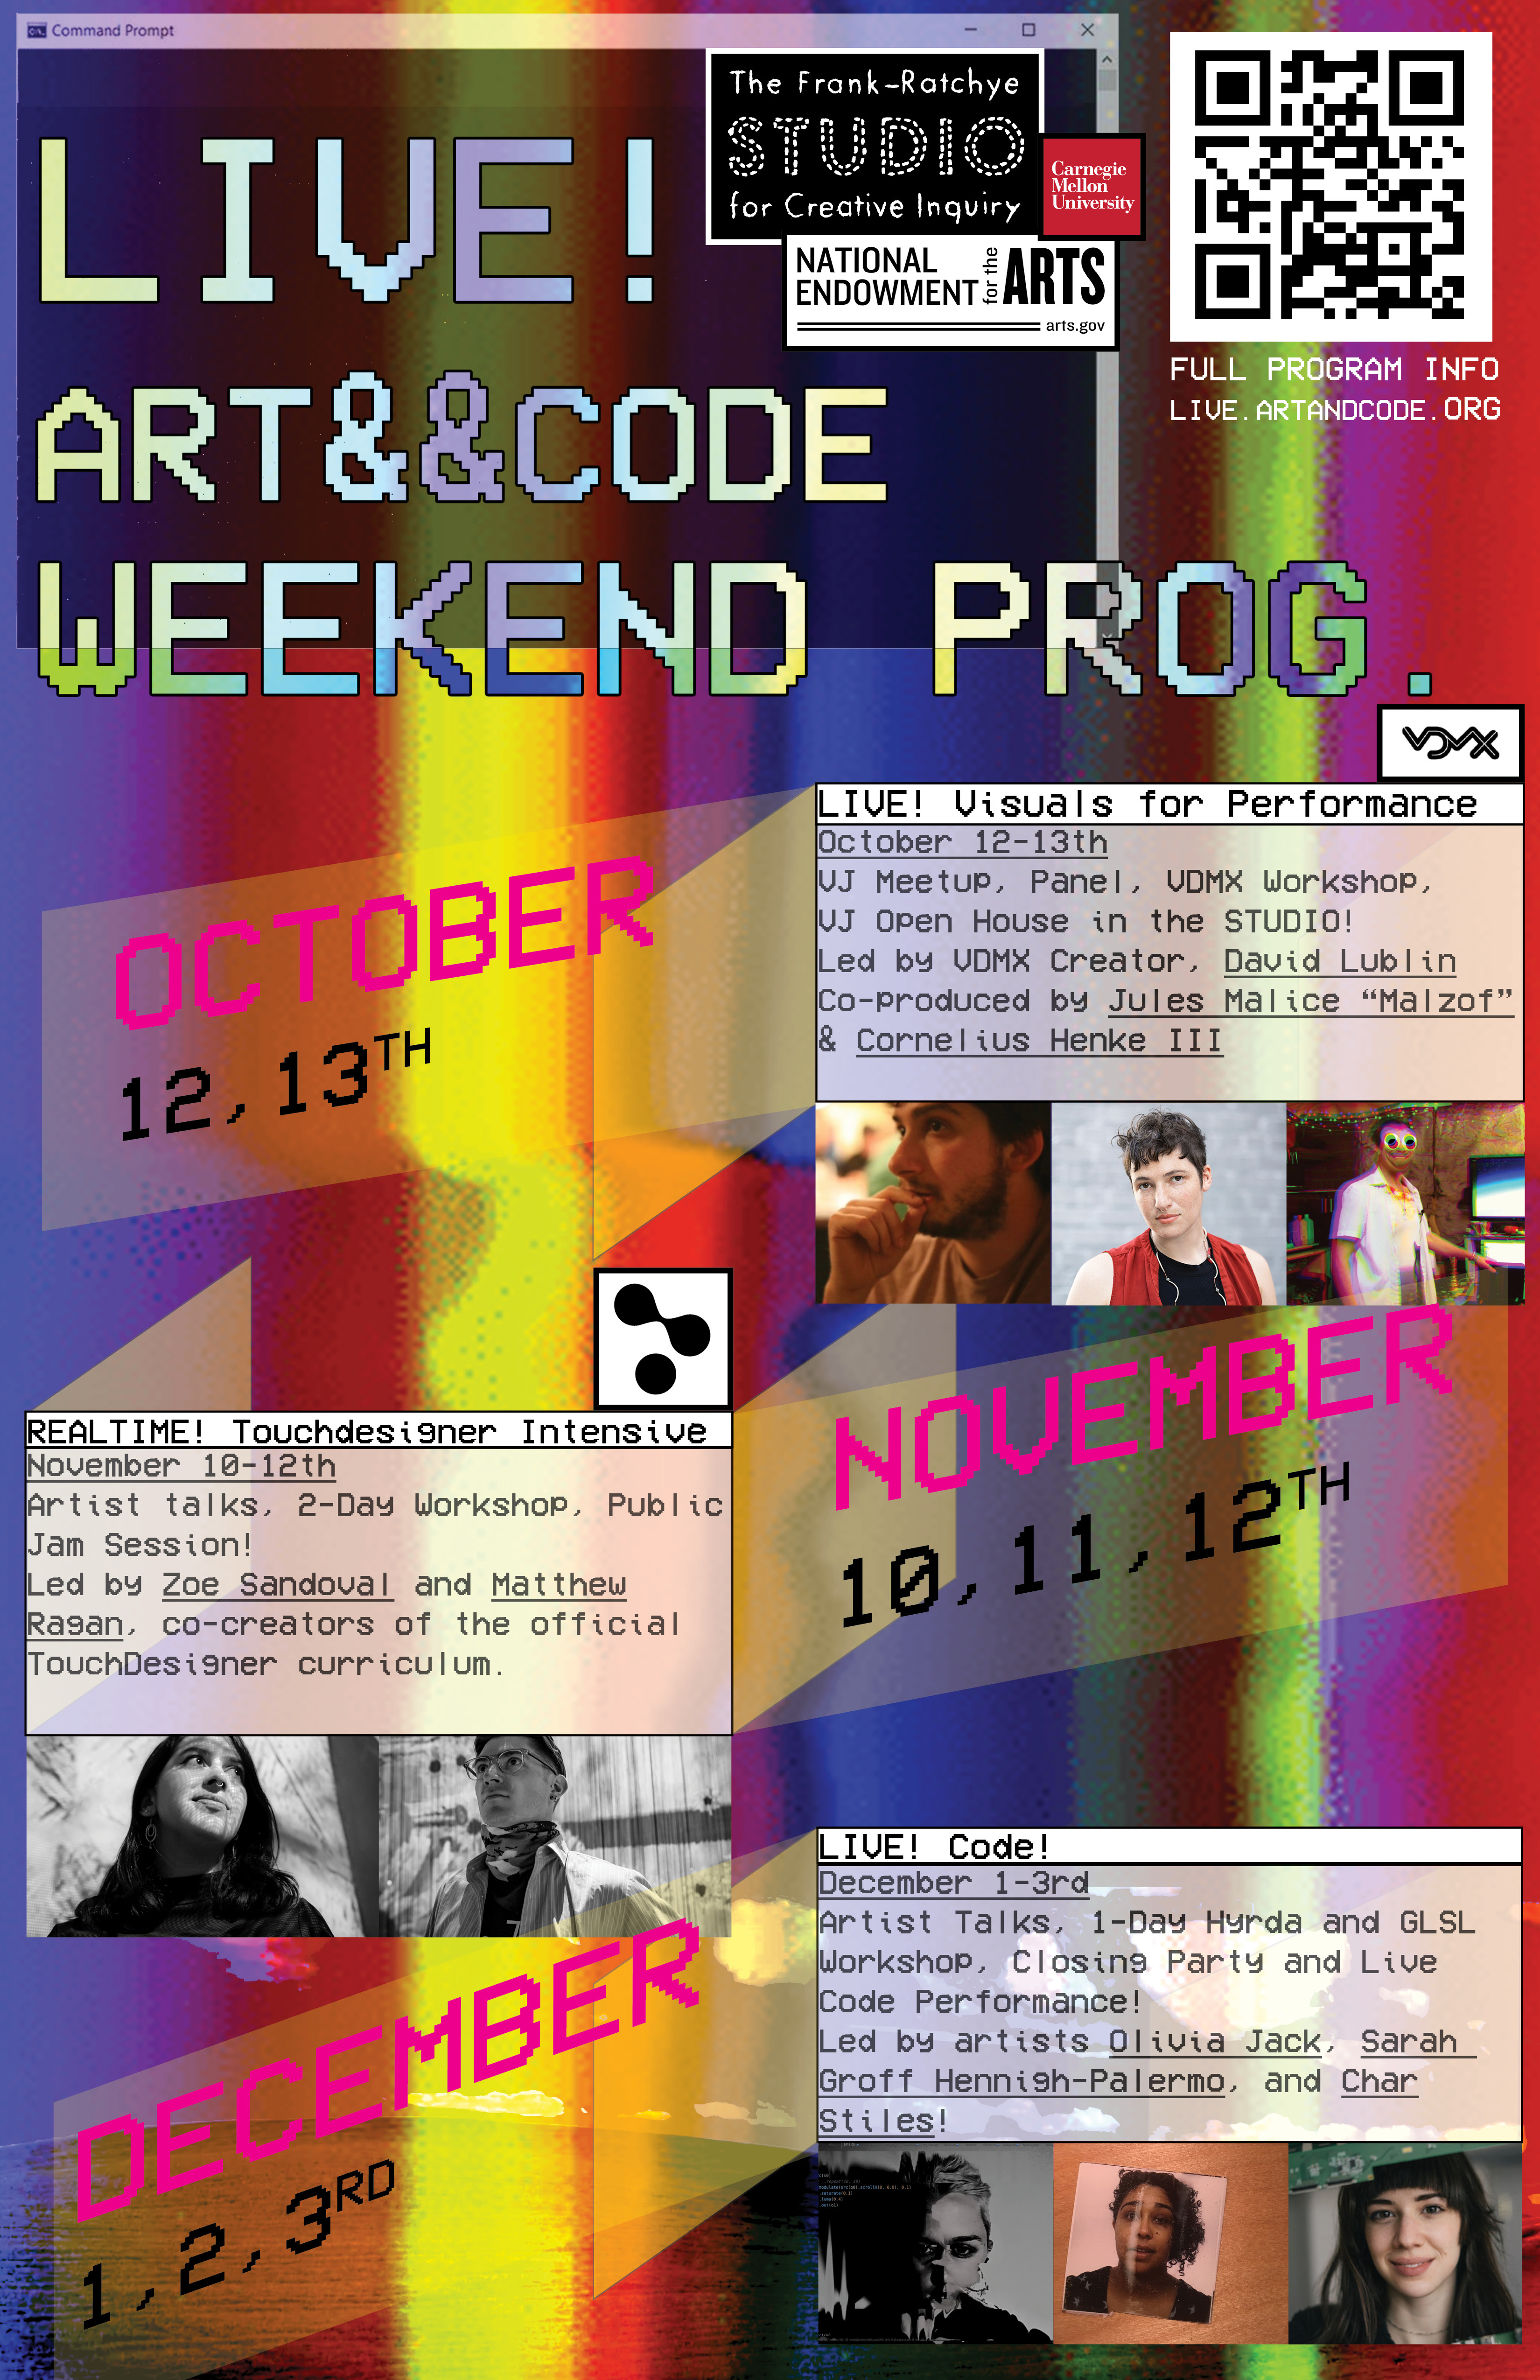 Weekend Program Poster which is outlined in text below